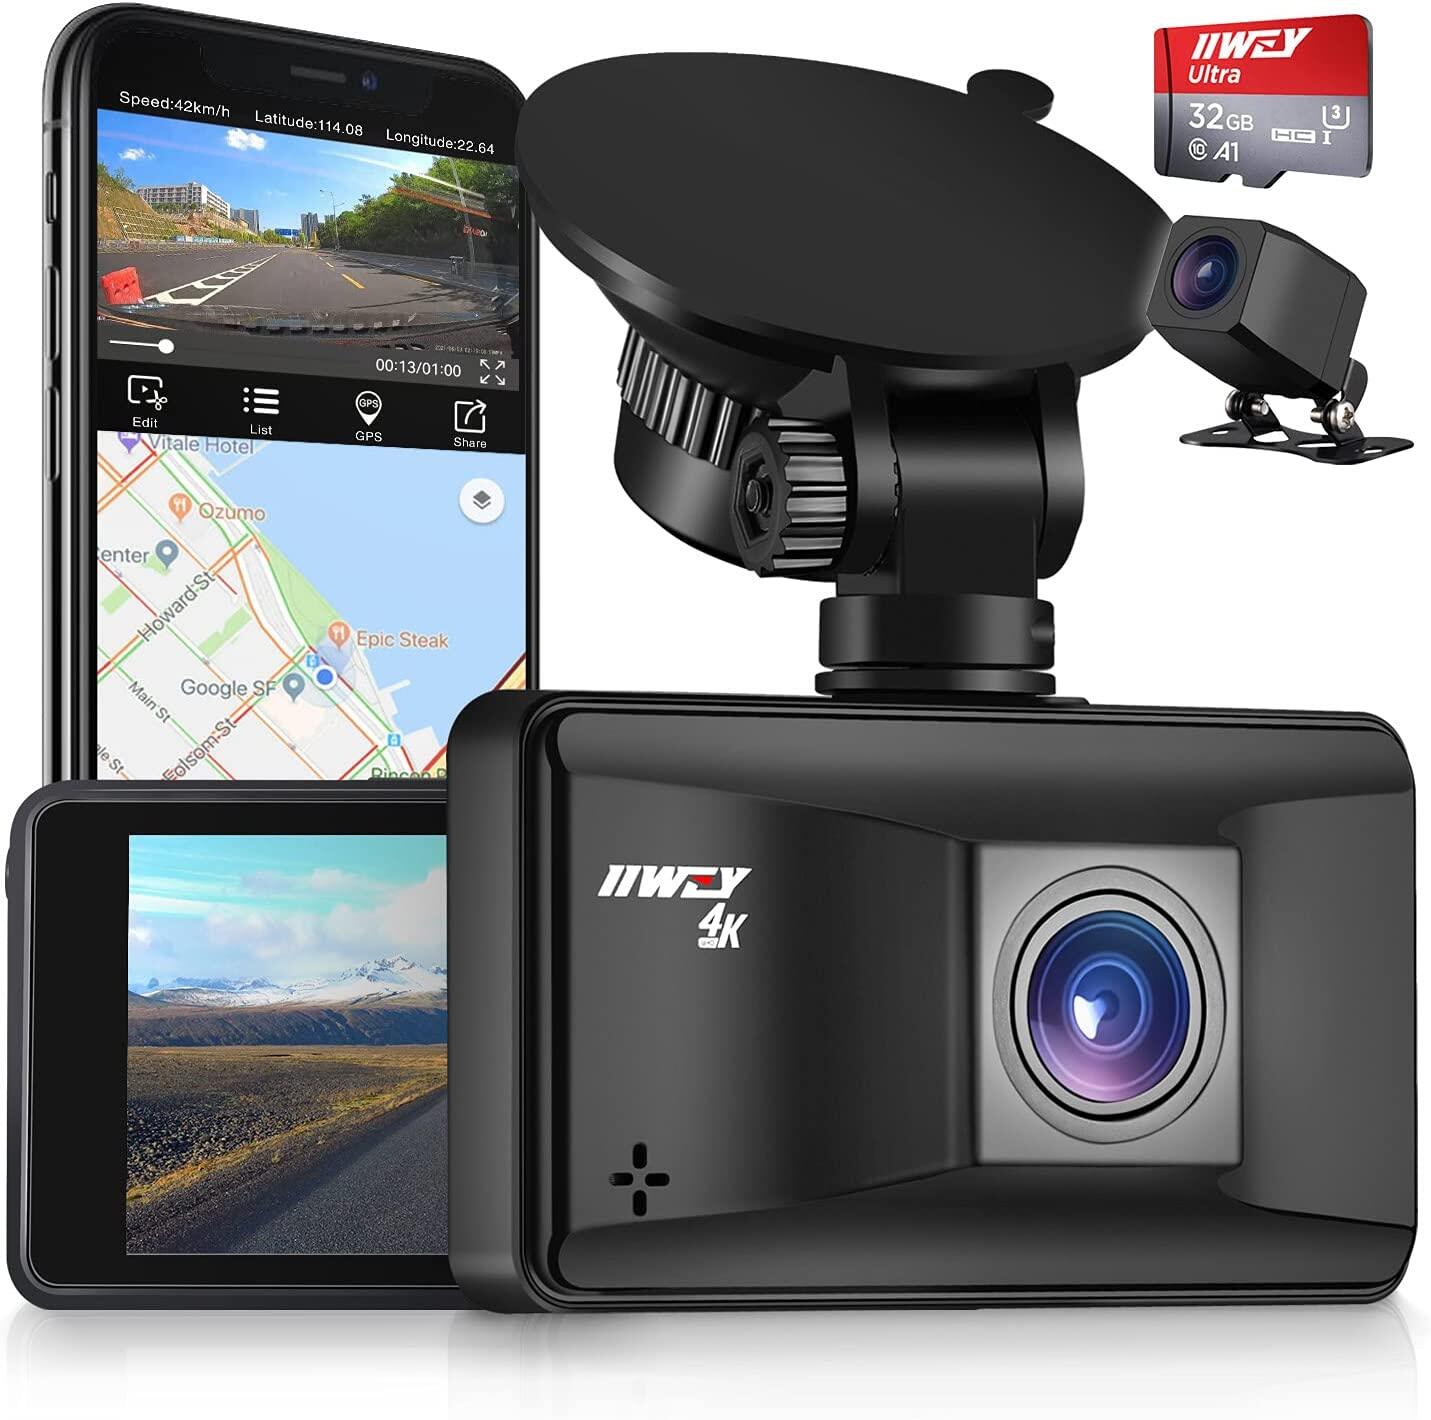 C54 iiwey 4K Dash Cam Front Rear with WiFi GPS, Upgraded Front 4K Rear 1080P or Single Front 4K 2160p@30fps Car Camera